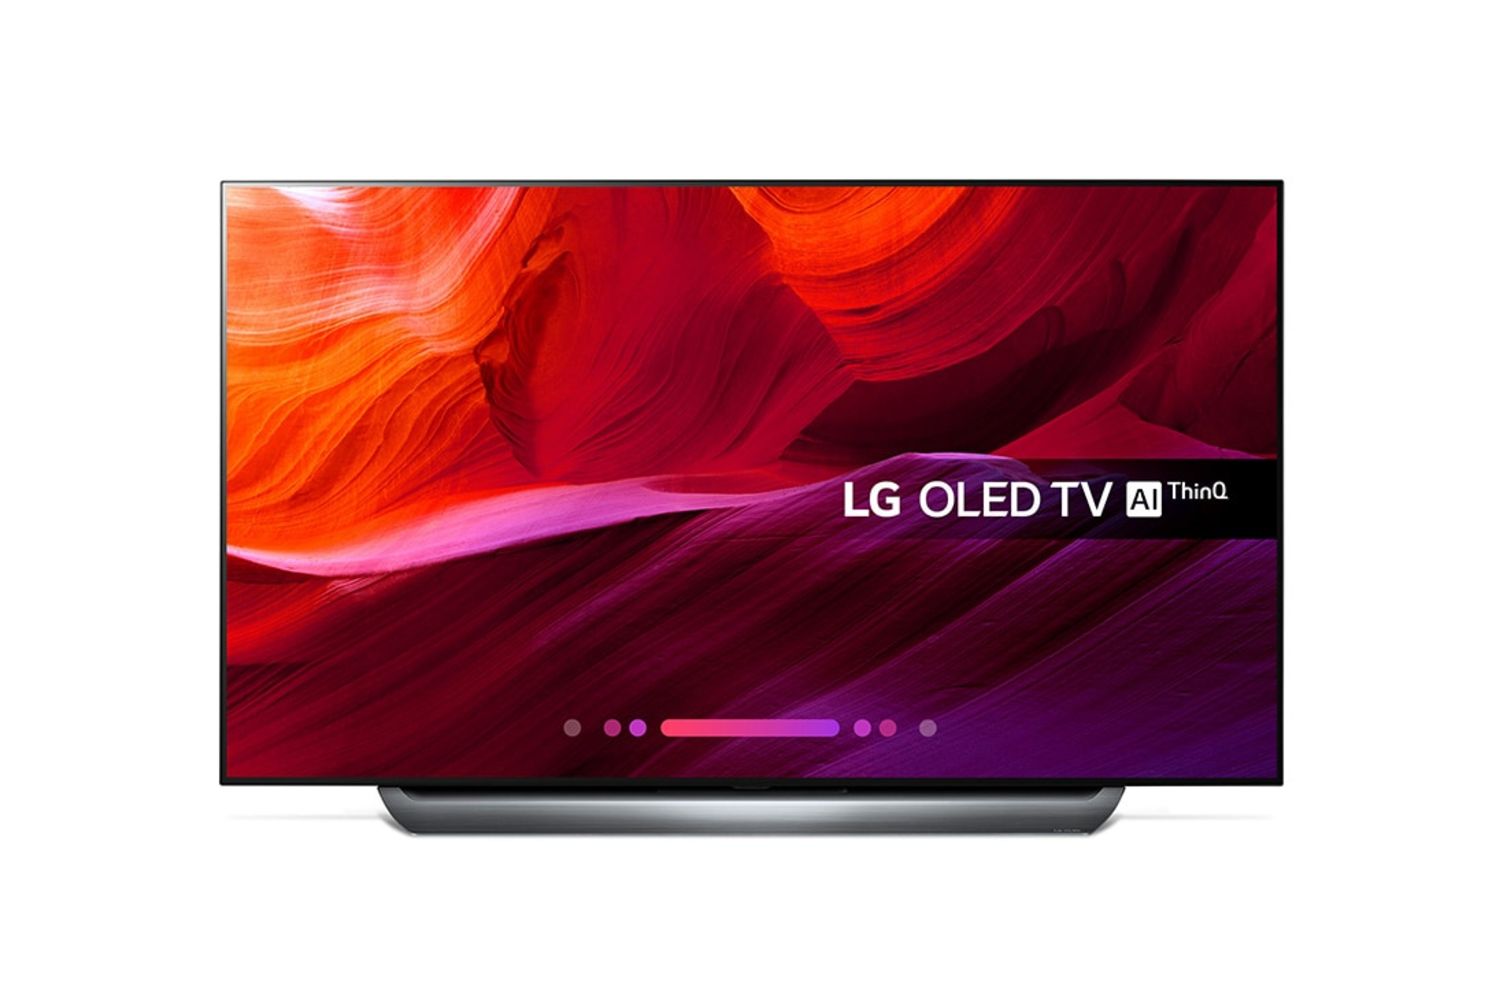 LG TVs & Monitors - Including 4K UHD Smart TVs up to 77 Inches, HD And Ultra-Wide Gaming Monitors